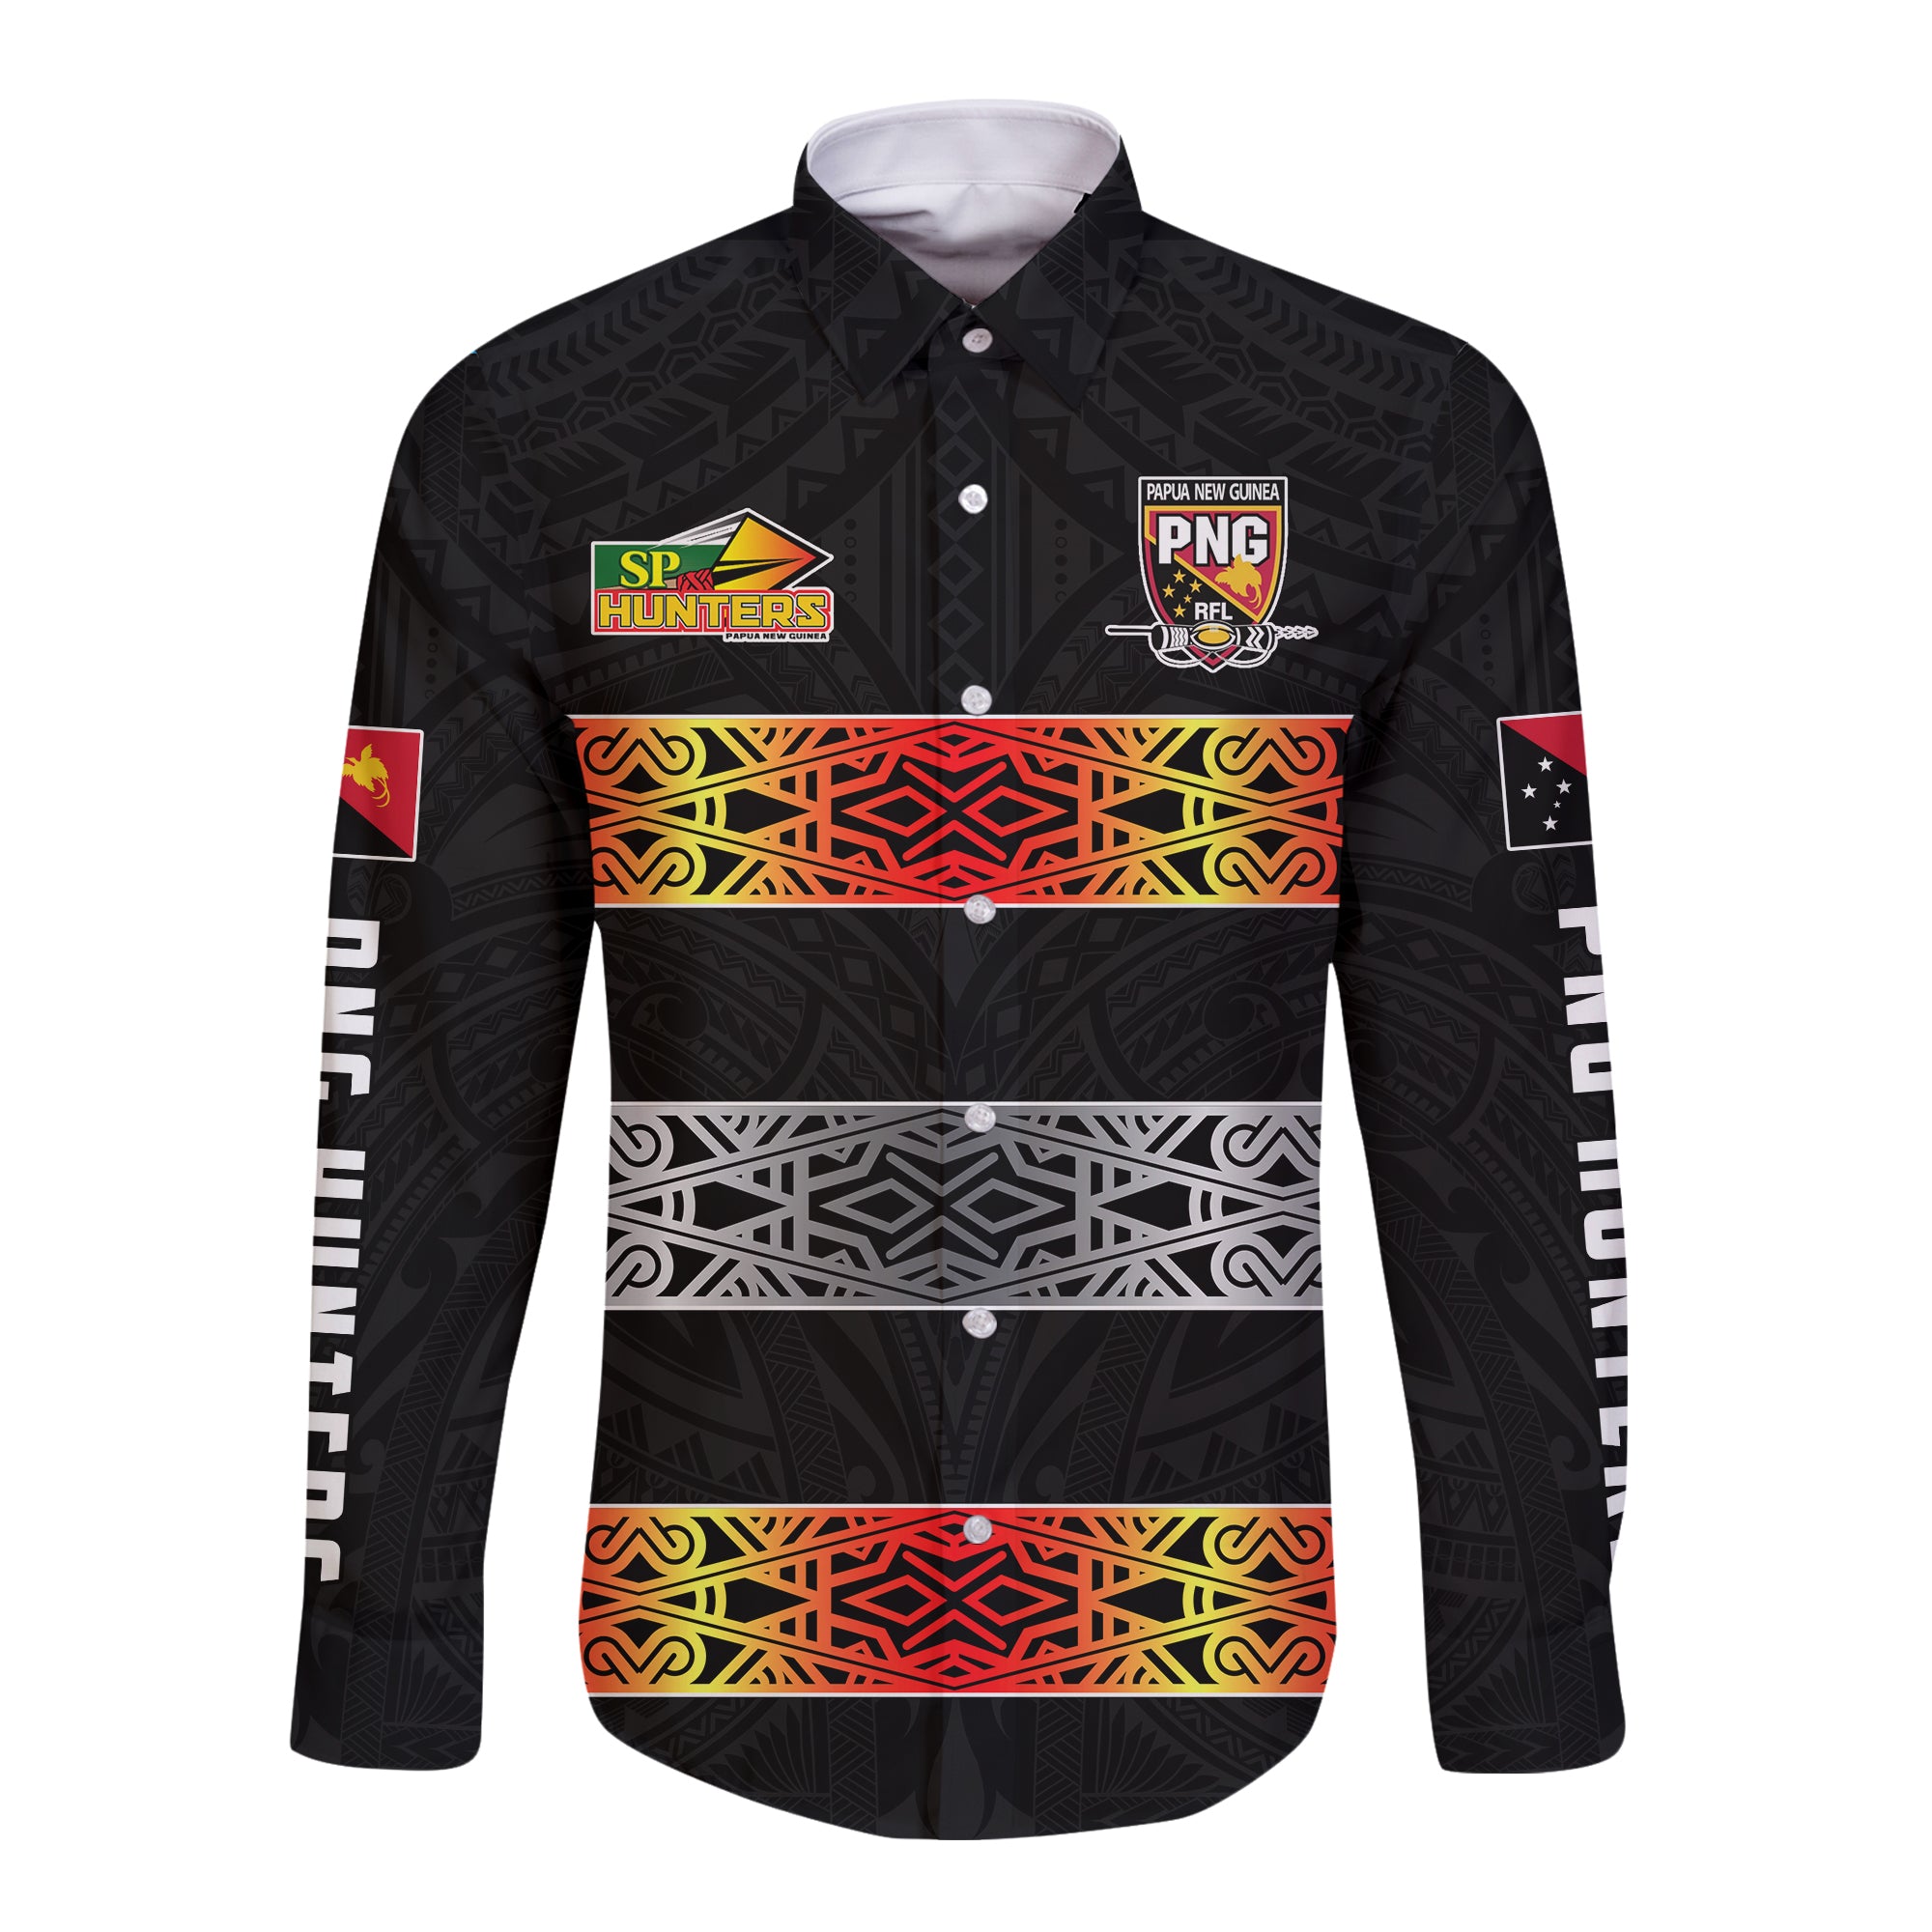 The Hunters PNG Hawaii Long Sleeve Button Shirt Papua New Guinea Hunters Rugby LT13 Unisex Black - Polynesian Pride